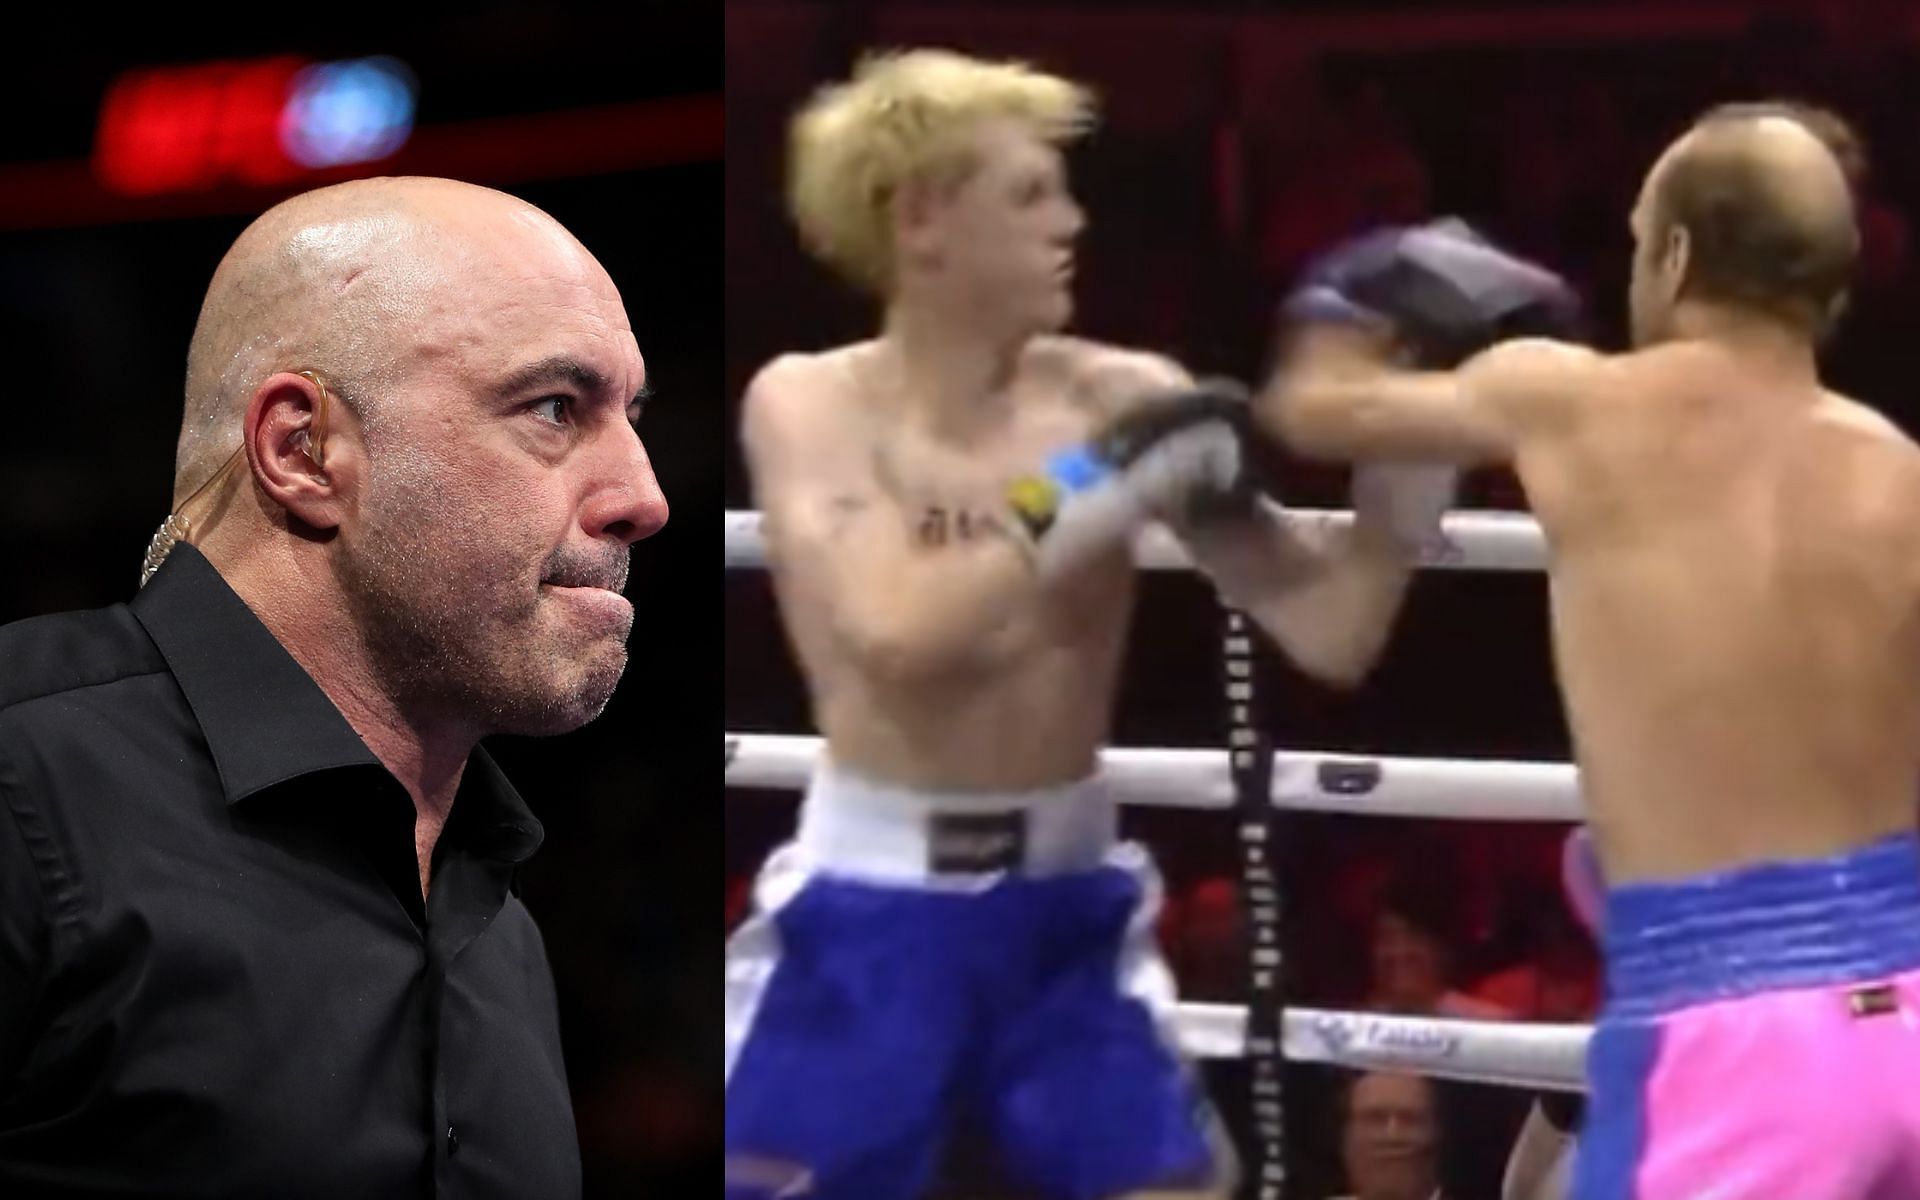 Joe Rogan (left) and the viral fight between &quot;father and son&quot; (right). [Images courtesy: left image from Getty Images and right image from Twitter @DanaExotic]